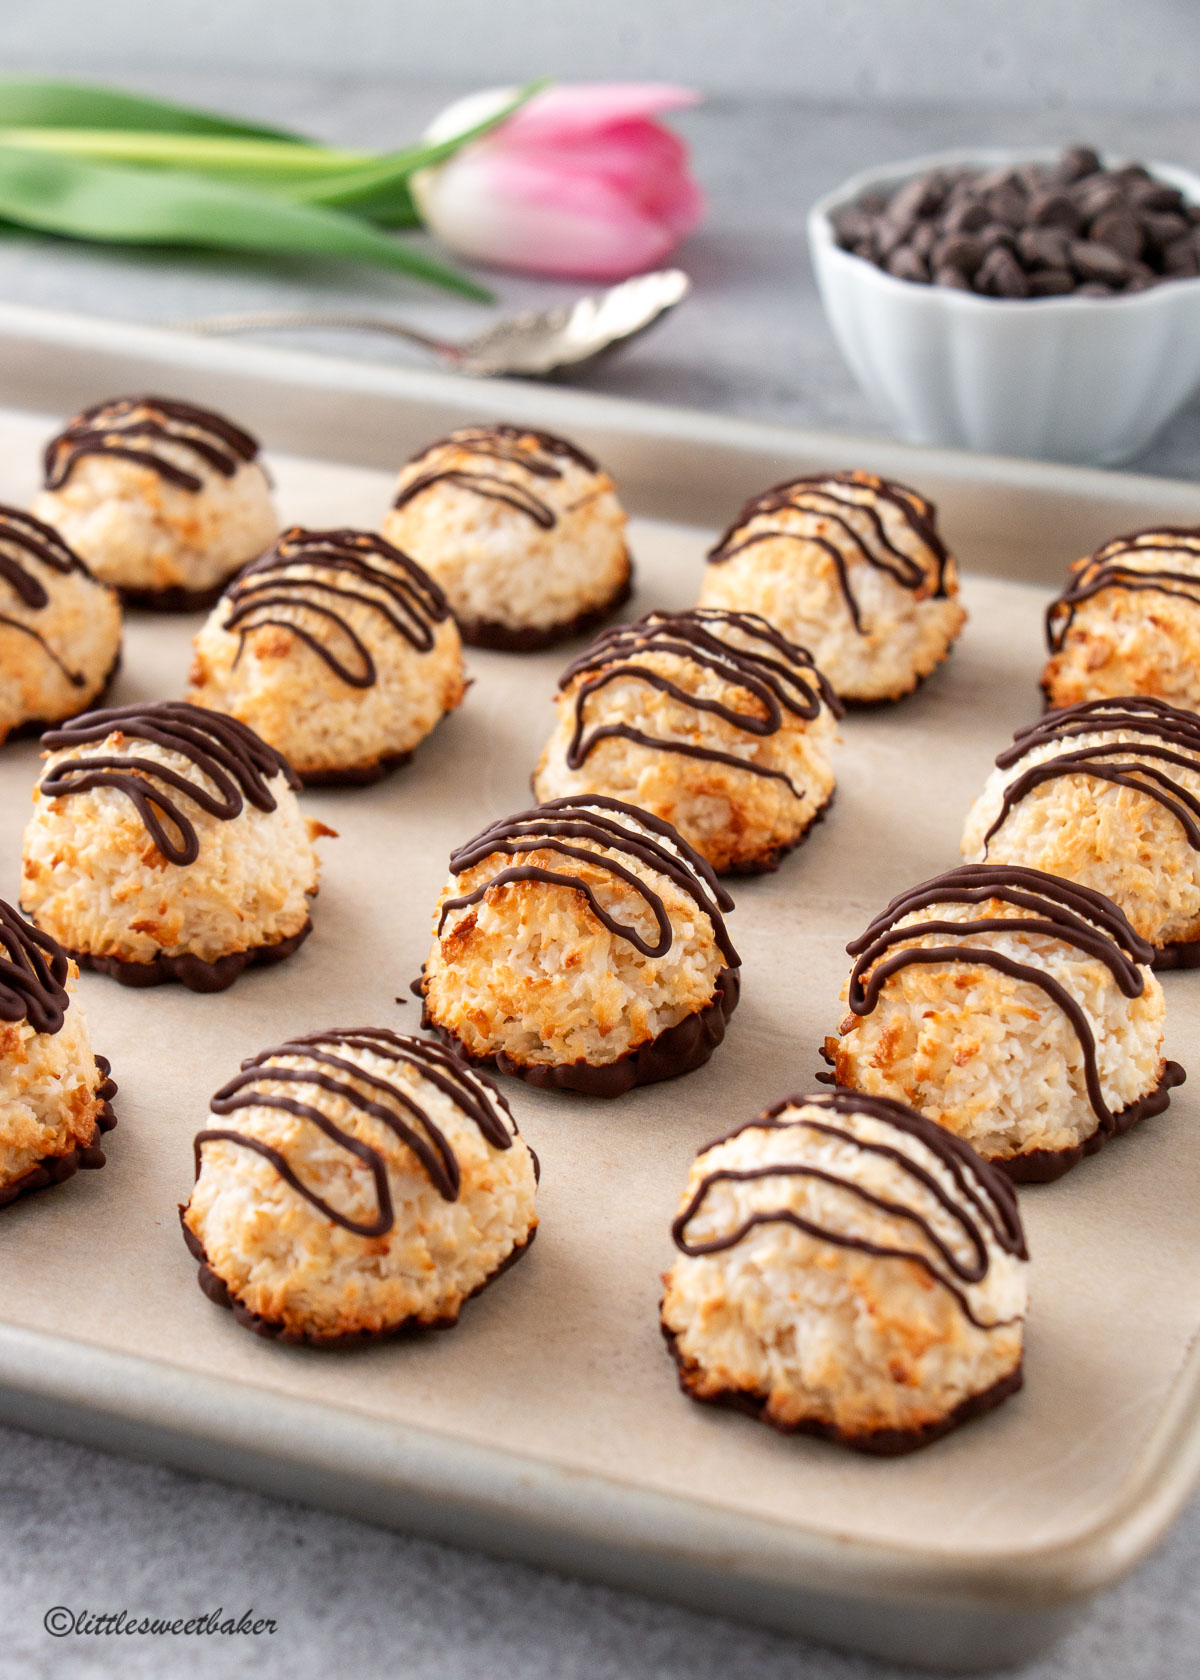 Chocolate drizzled coconut macaroons lined up on a baking sheet.